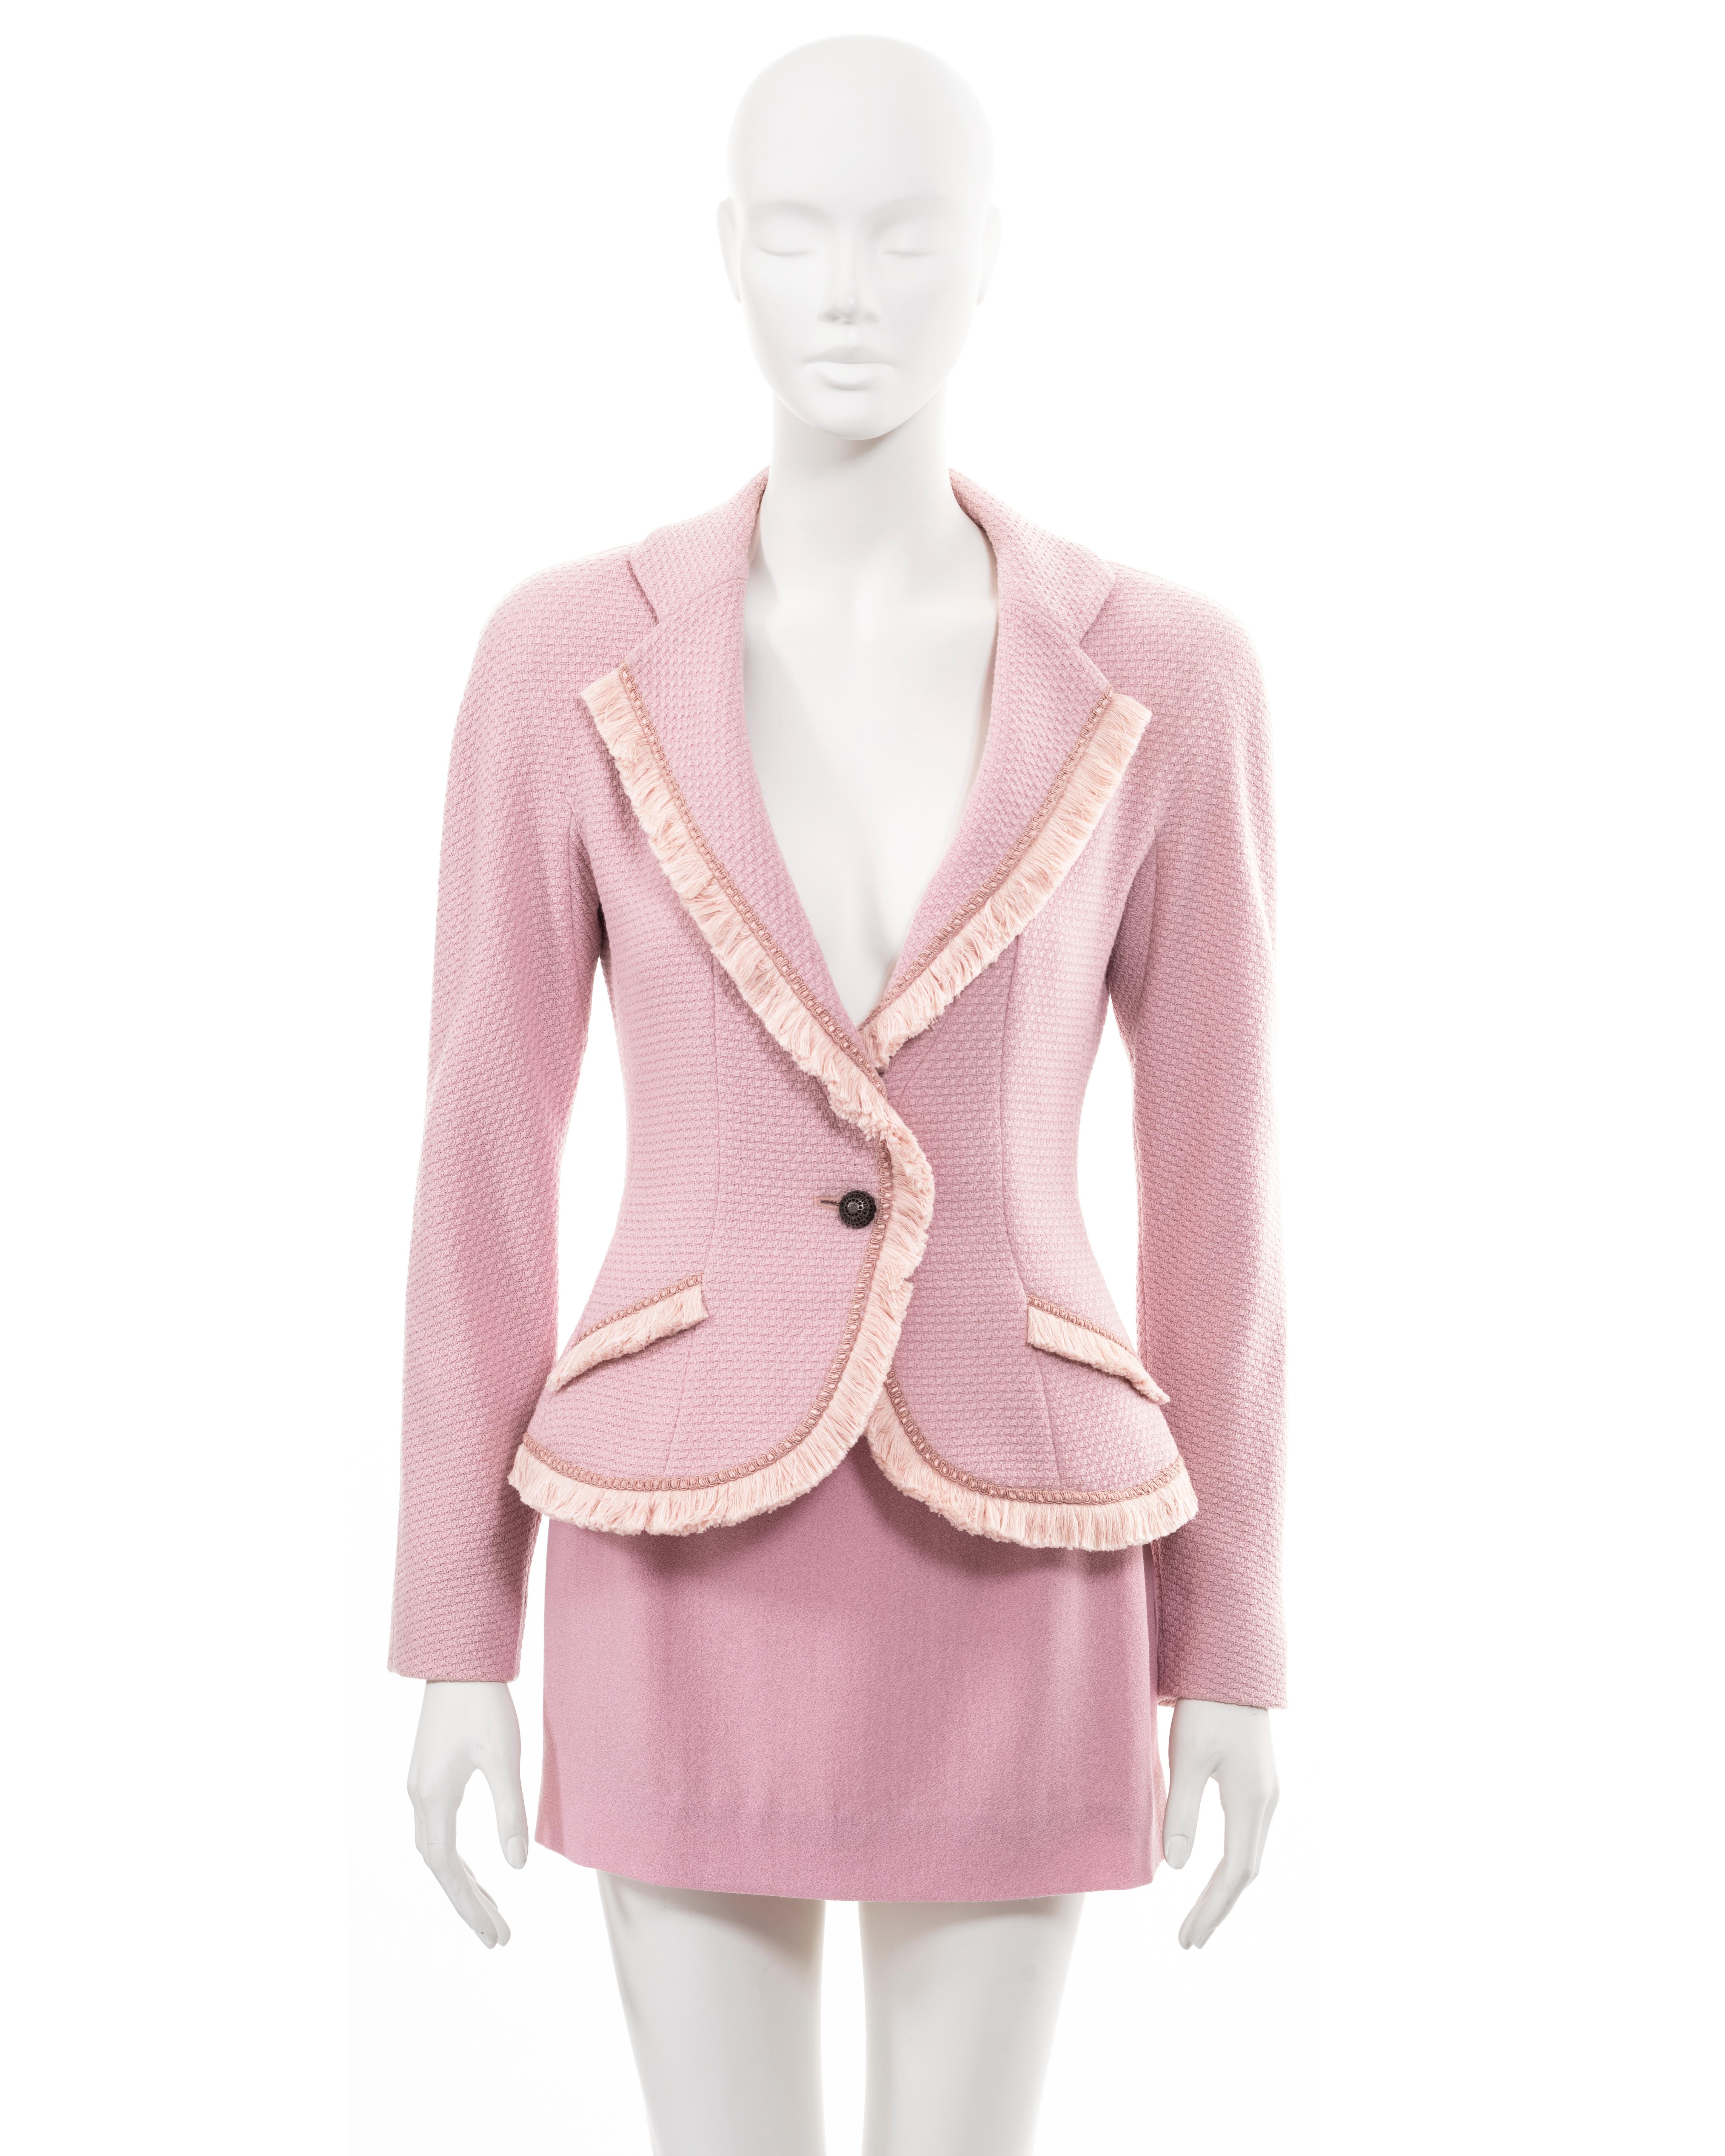 ▪ Christian Dior pink mini skirt suit
▪ Creative Director: John Galliano
▪ Sold by One of a Kind Archive
▪ Fall-Winter 1997 
▪ Single-breasted blazer jacket in pink wool 
▪ Trimmed with fringes of silk threads
▪ Padded shoulders and hips 
▪ Mini